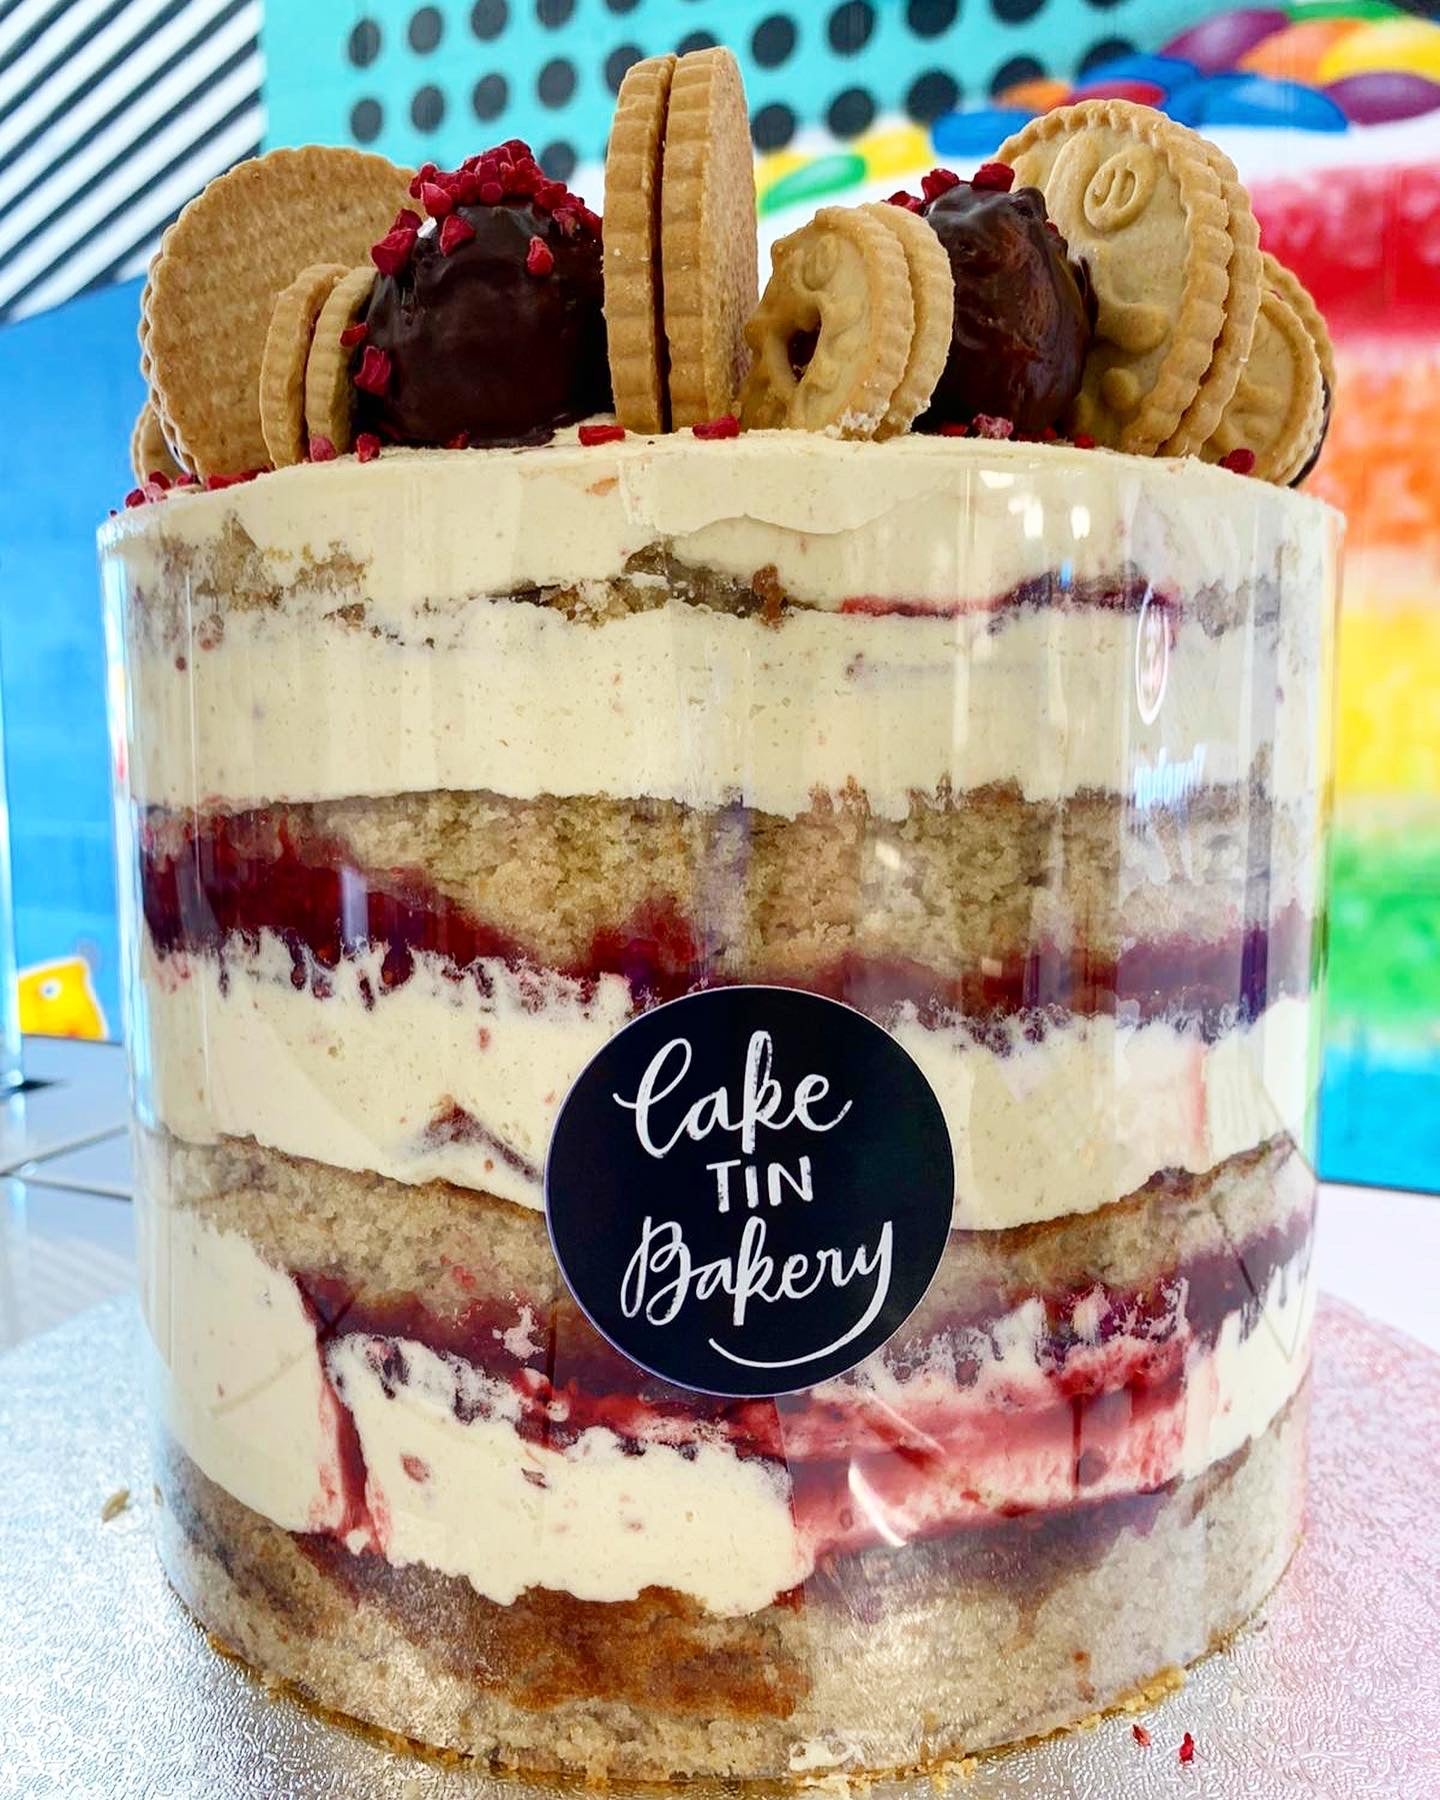 The Vegan Naked Layer Cakes